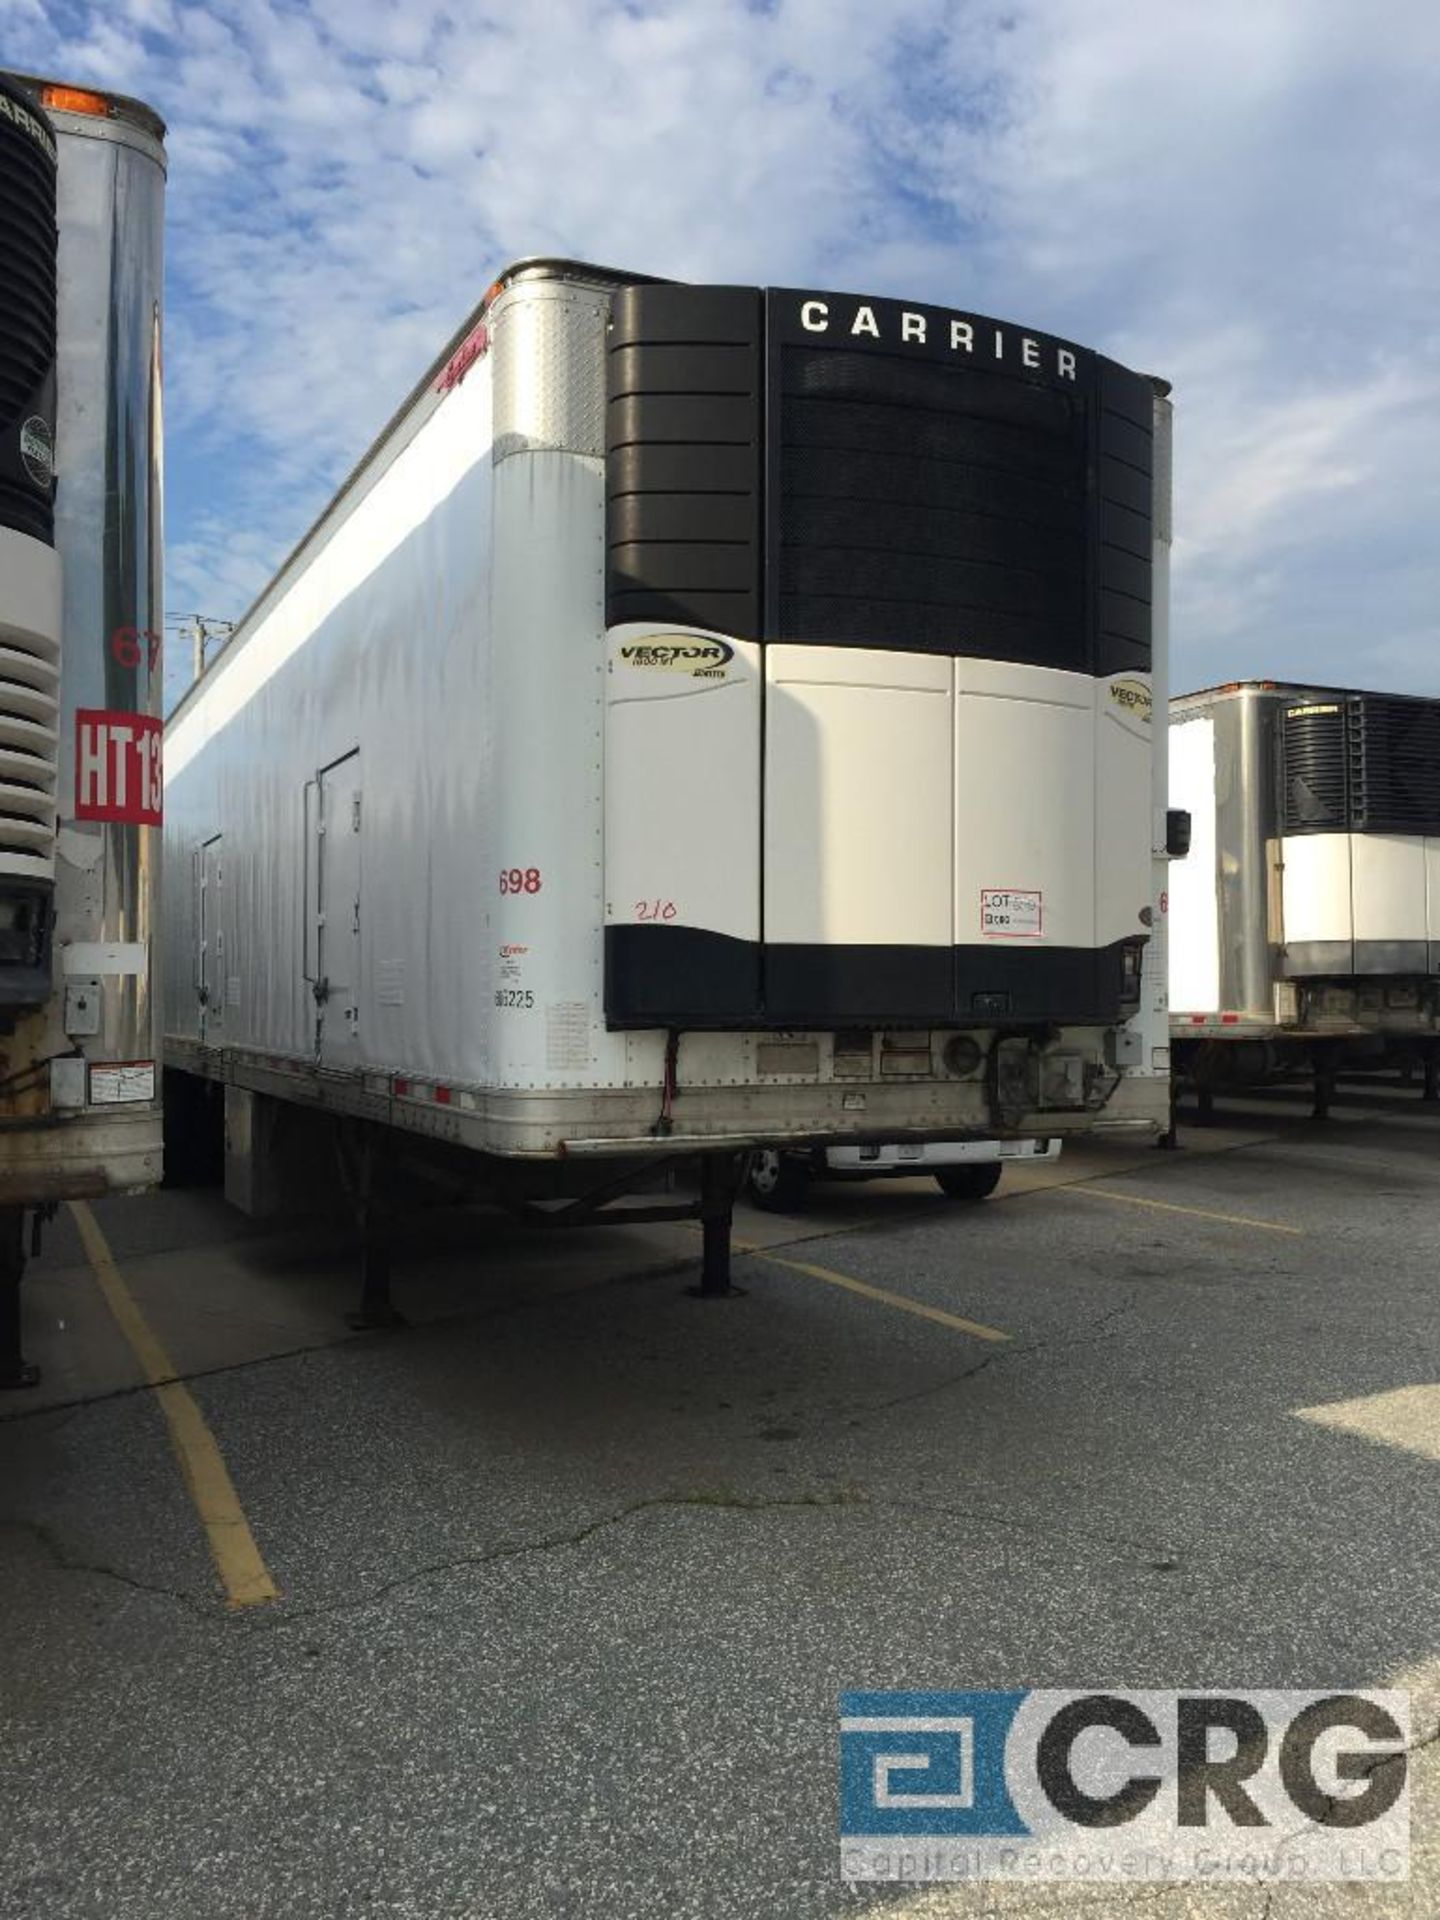 2009 Great Dane Multi Temp Refrigerated Semi Trailer - 45 Long, 102" wide, Carrier Vector 1800MT - Image 3 of 10